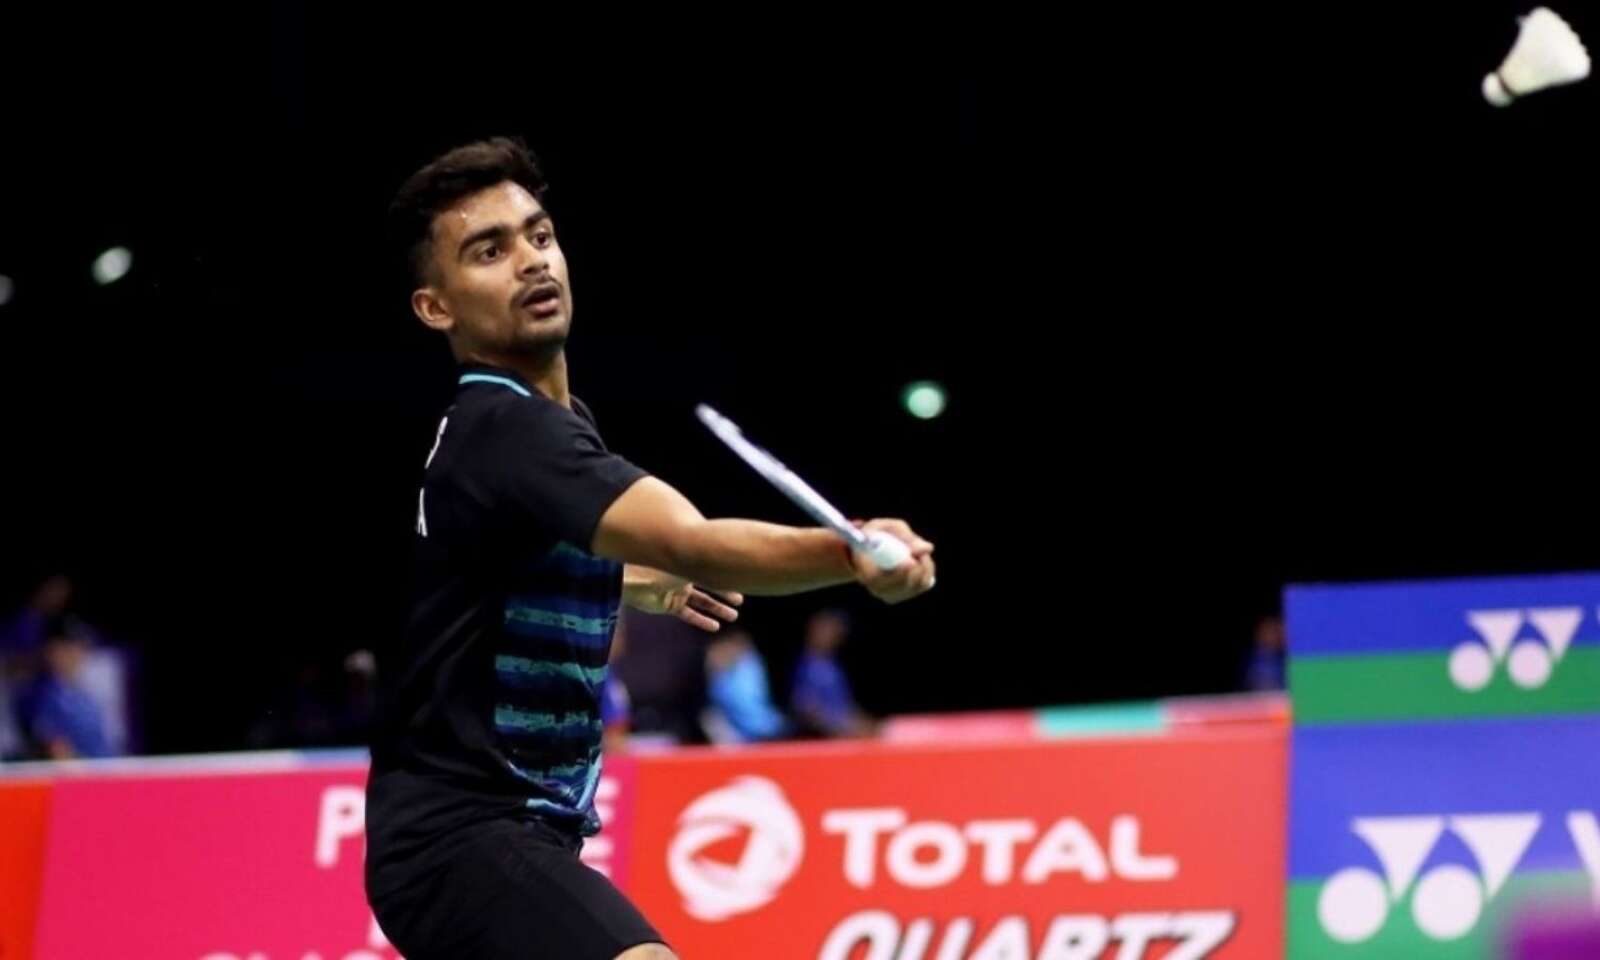 French Open 2021 Dhruv Kapila/Sikki Reddy and Sameer Verma in action — Scores, Updates, Live Blog